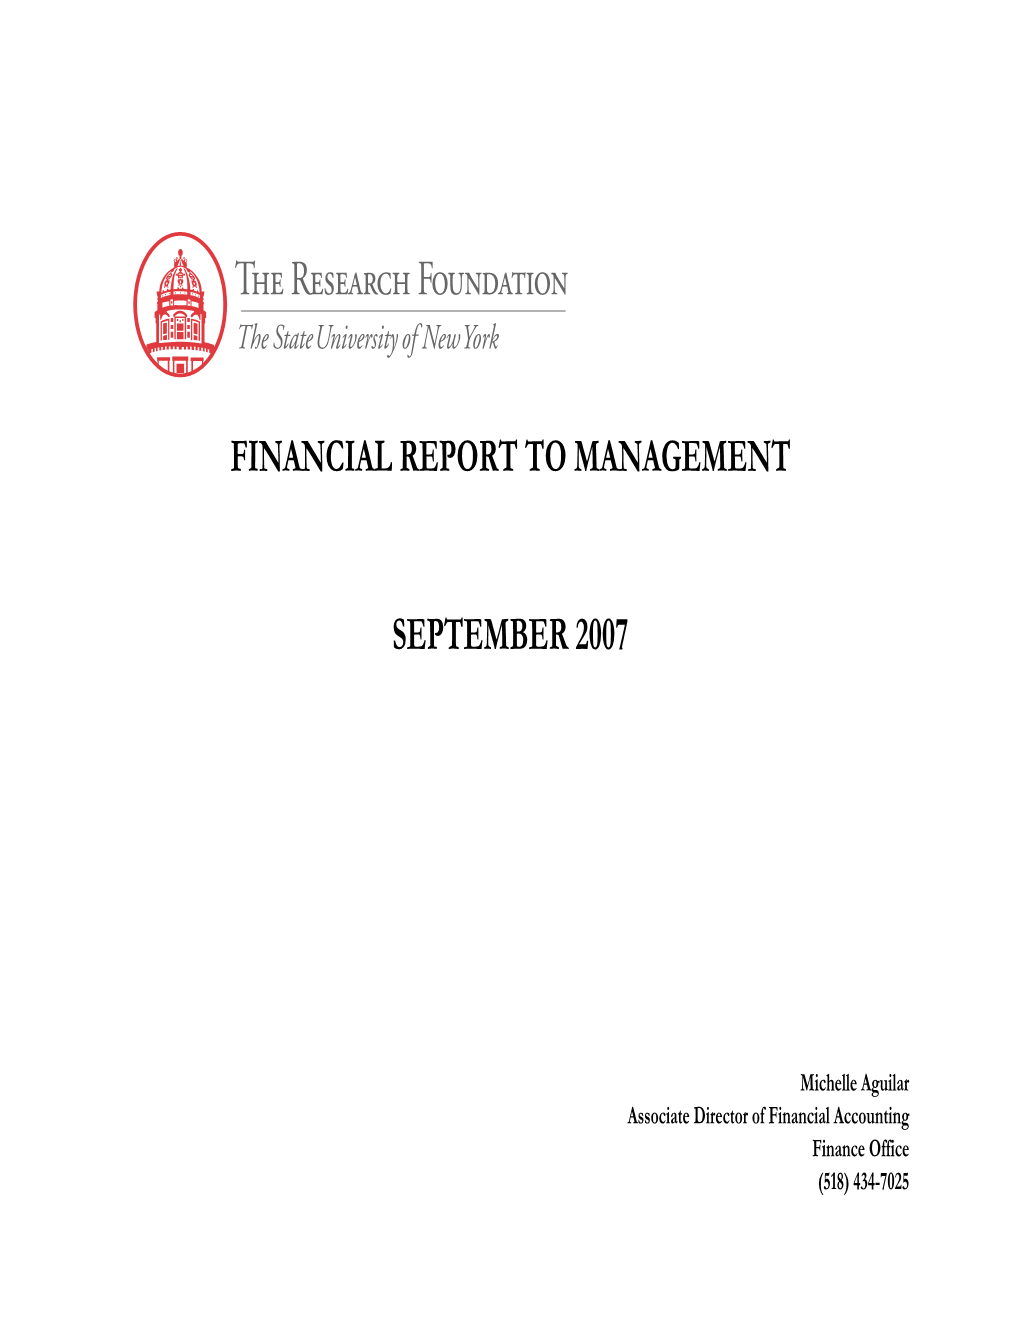 Monthly Management Report September 2007 10/16/2007 Executive Summary Financial Report to Management